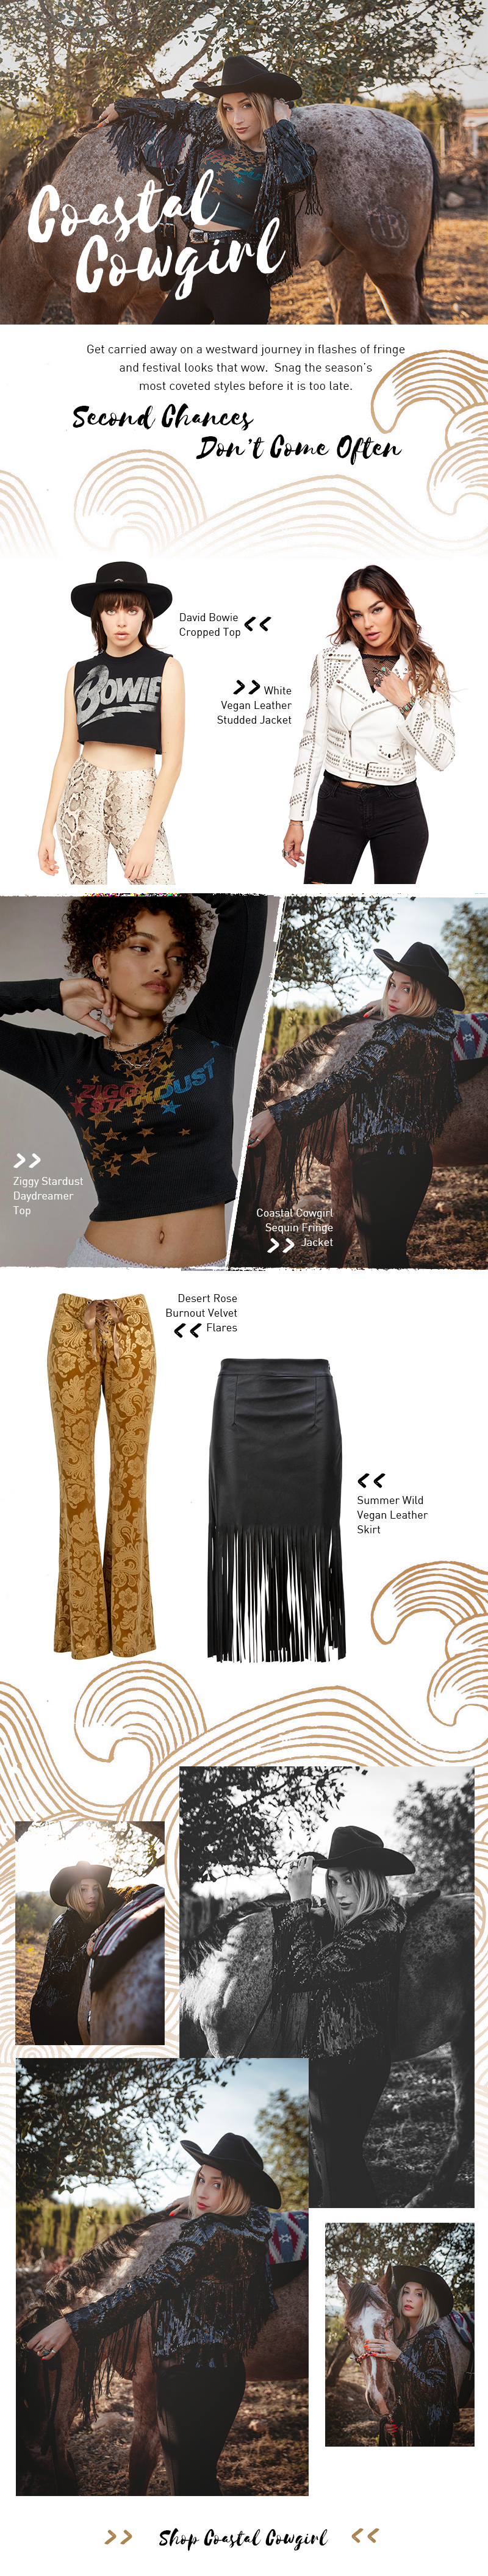 coastal cowgirl | Festival outfits for women 